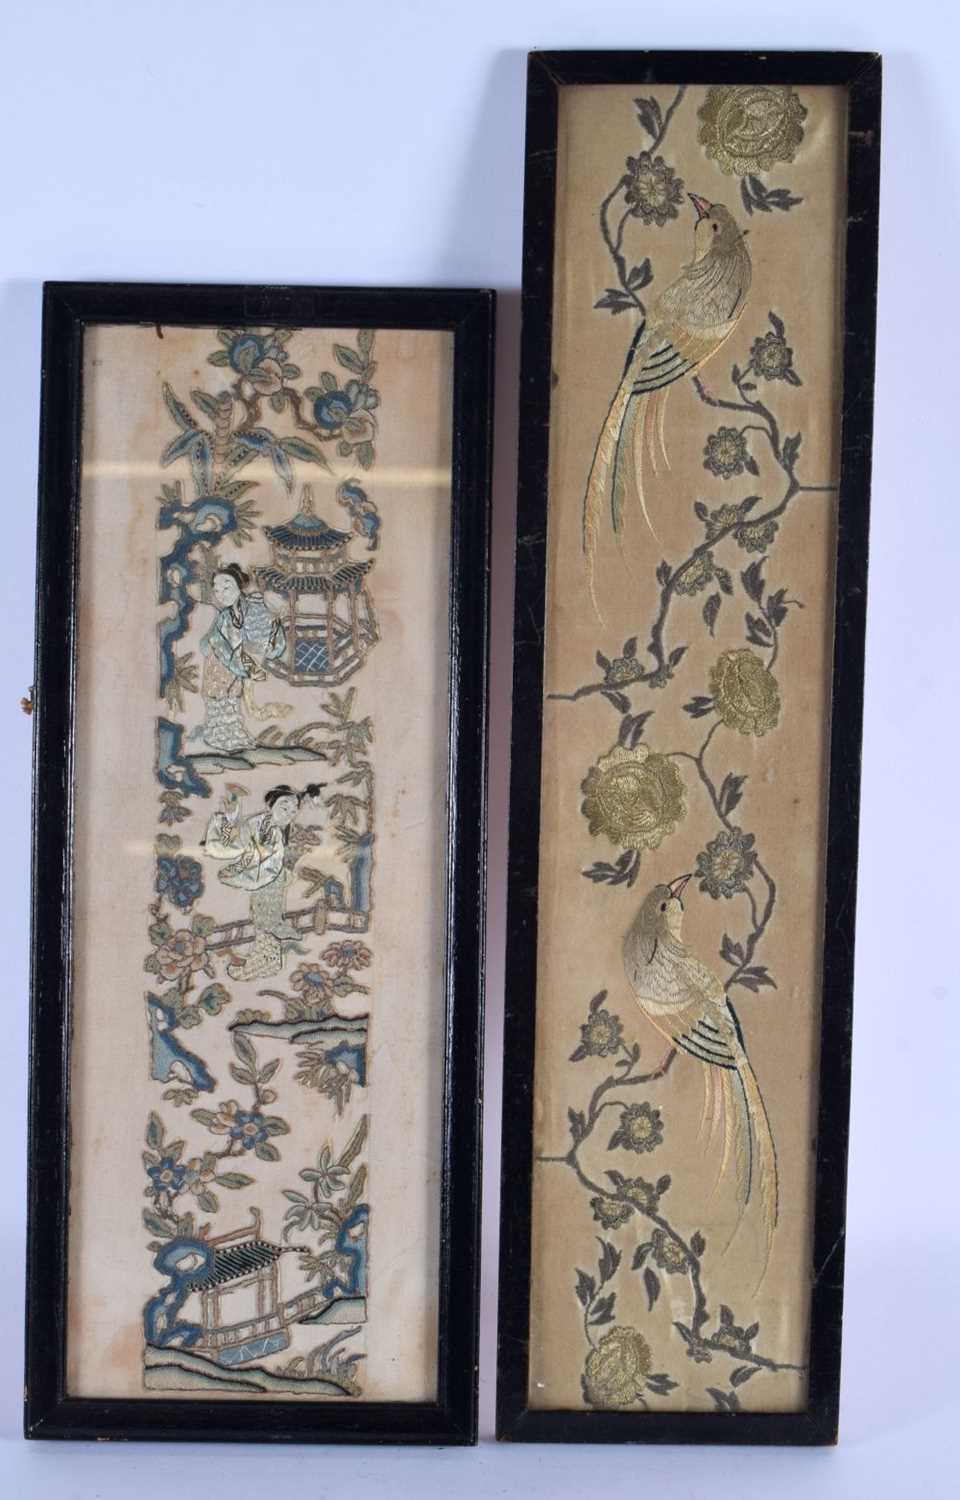 TWO 19TH CENTURY CHINESE SILK EMBROIDERED PANELS depicting birds and figures. Largest 50 cm x 10 cm.